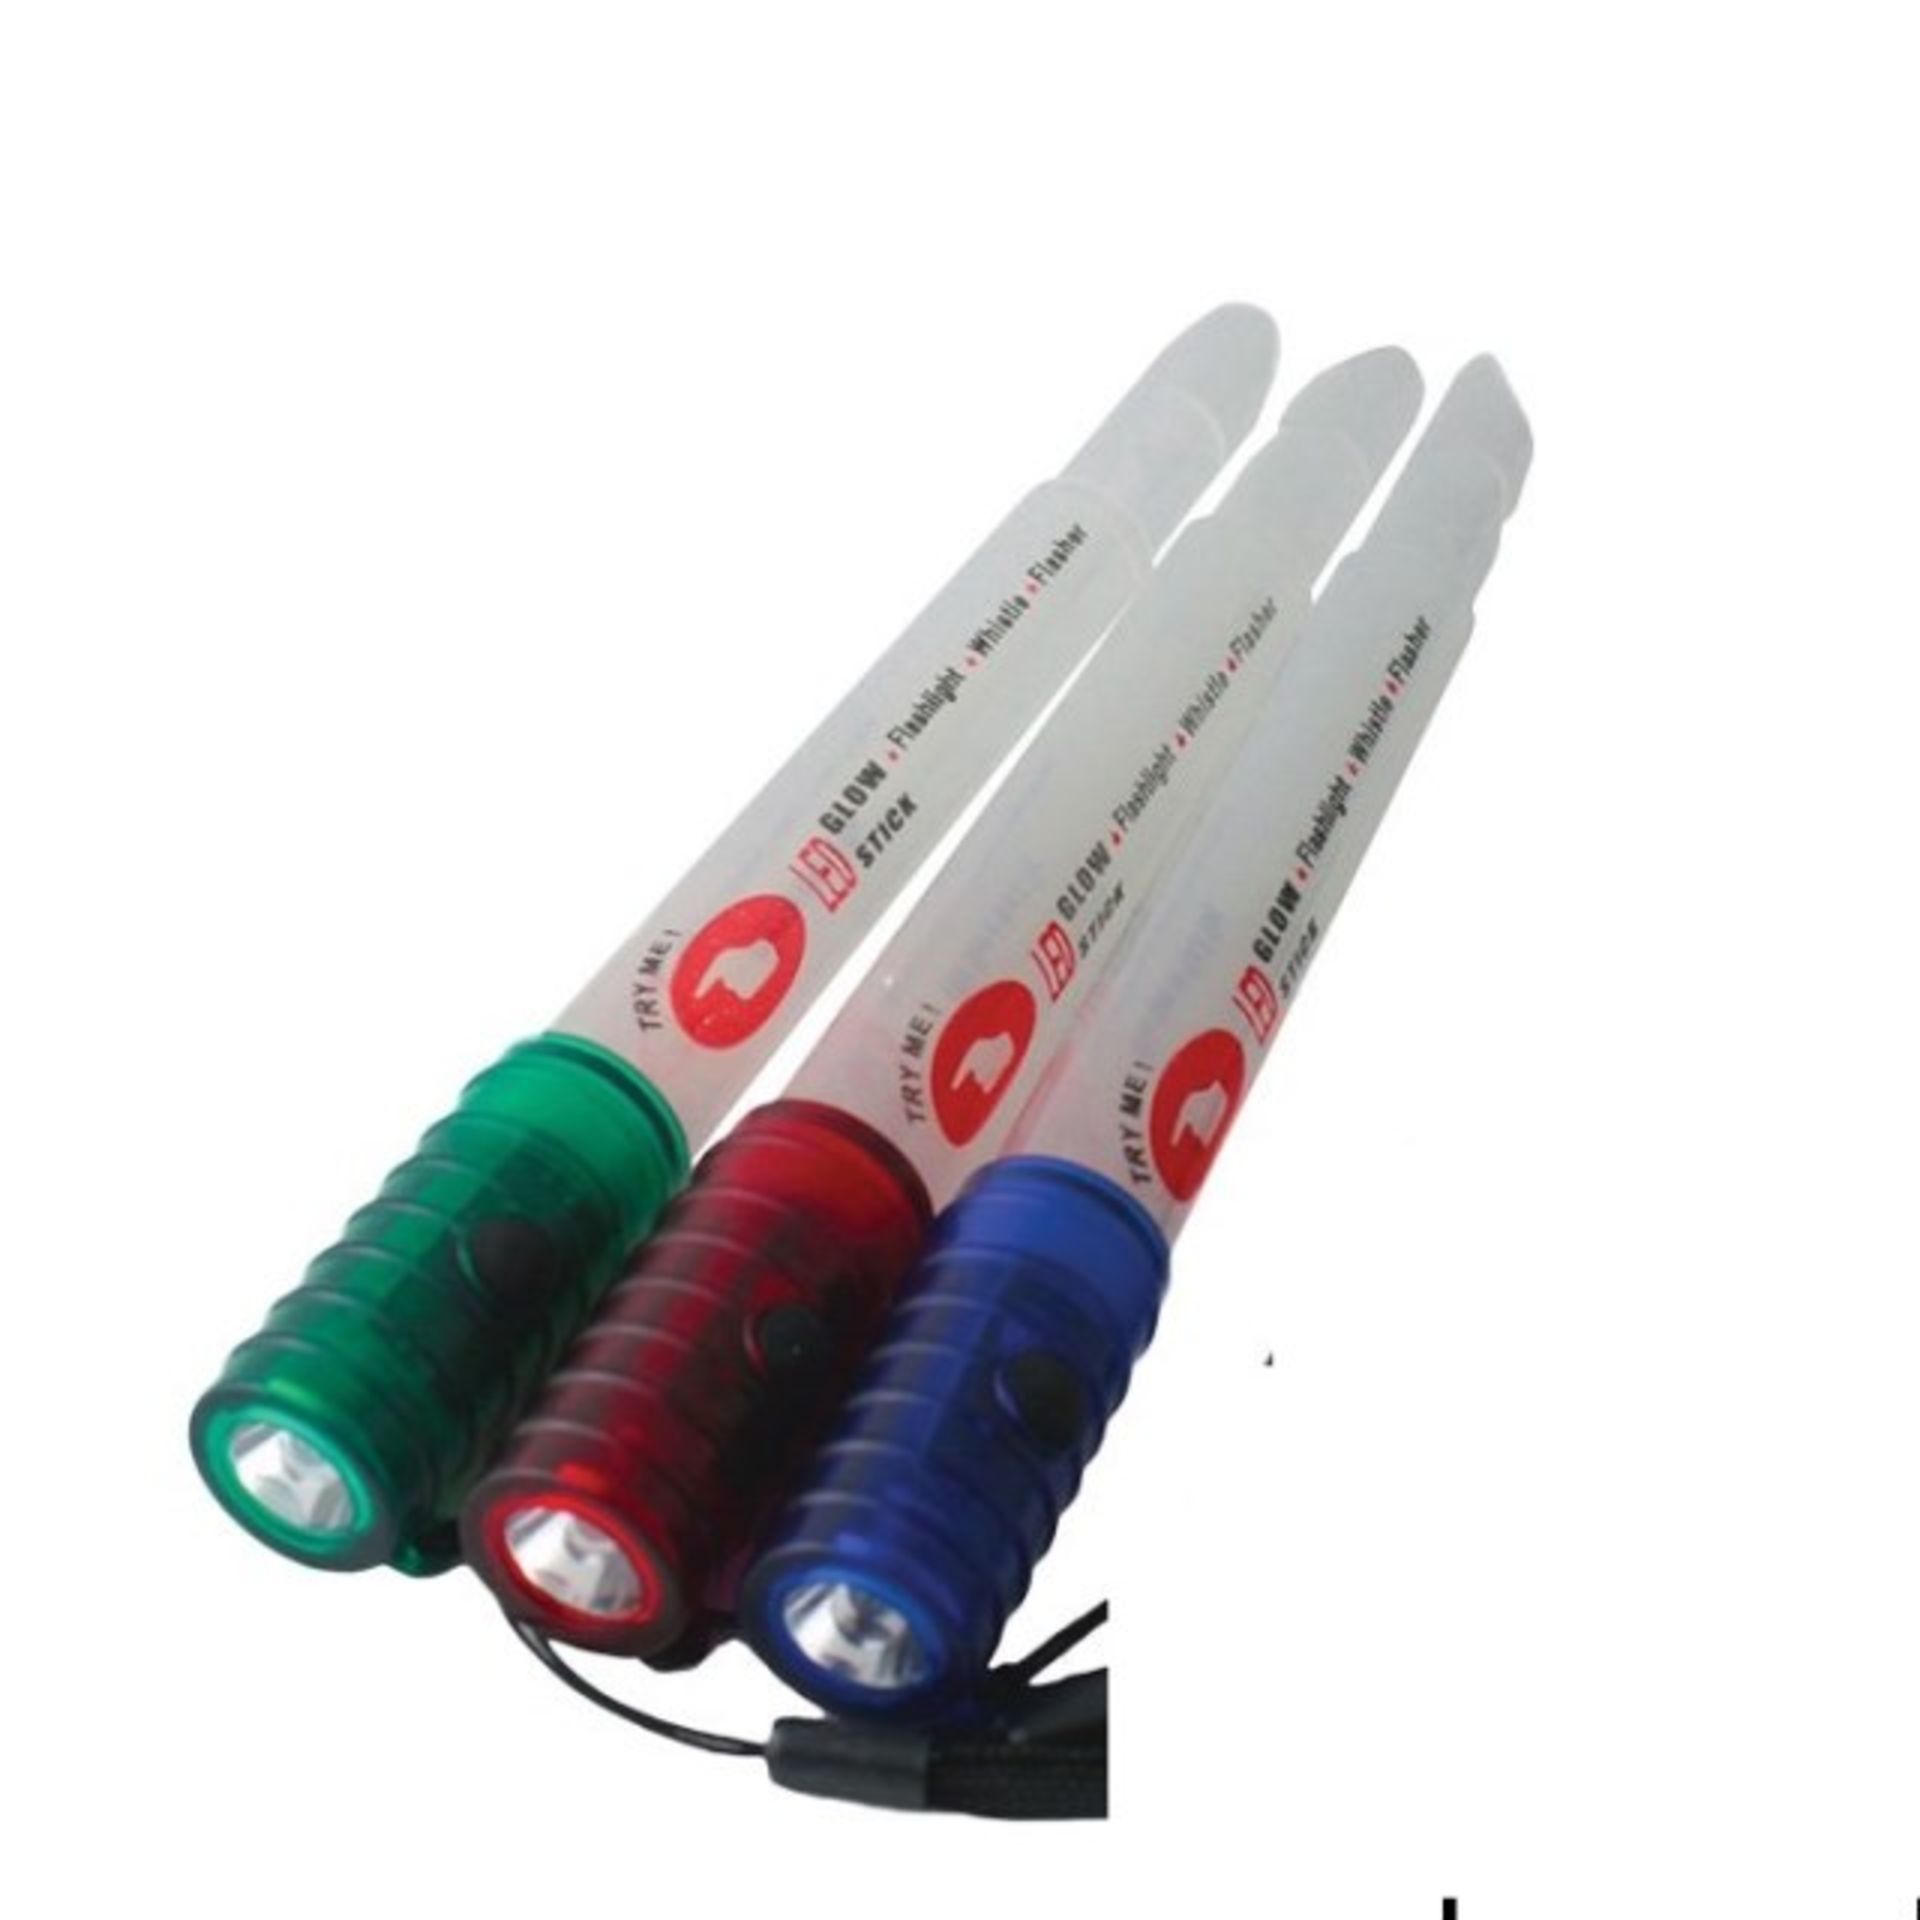 + VAT Brand New Three LED Glowstick Torches With Emergency Whistle and 3 Light Settings Includes - Image 3 of 3